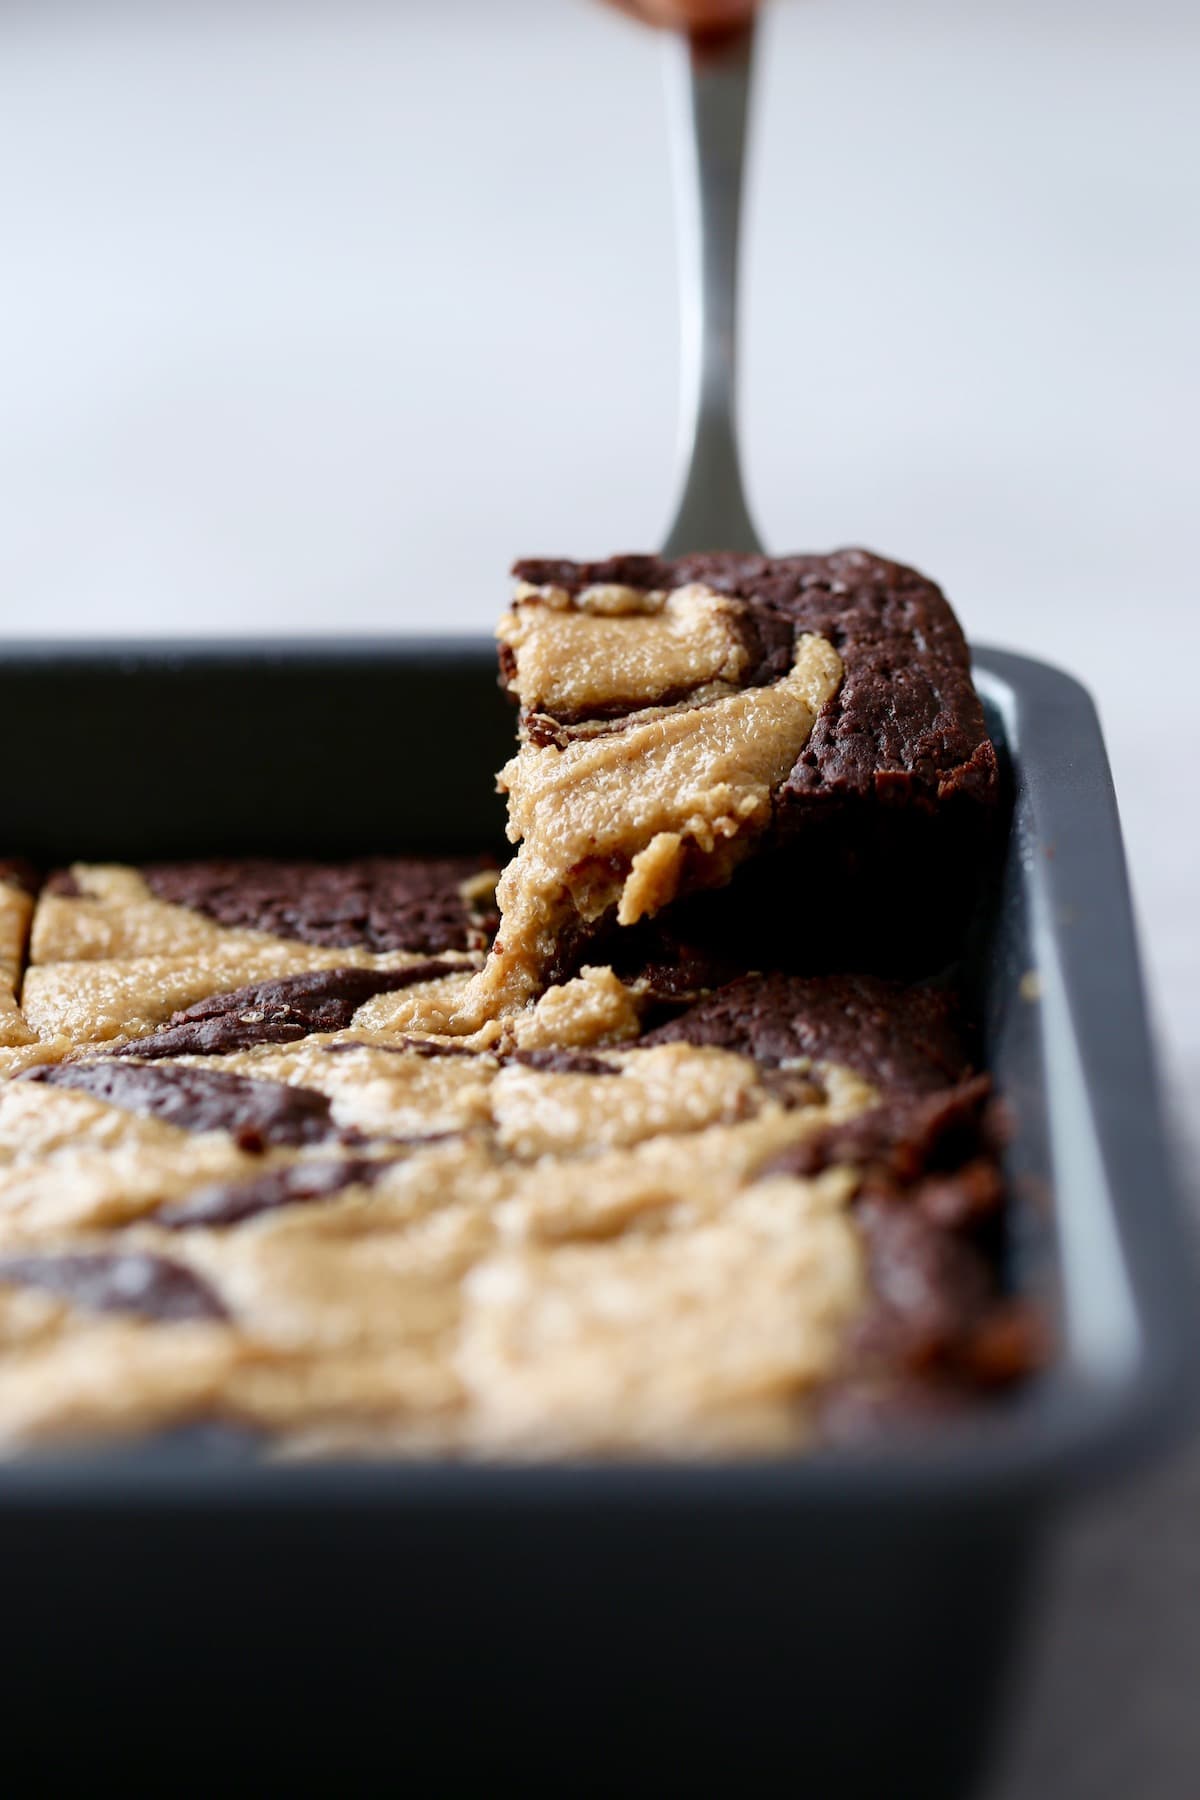 a peanut butter brownie being pulled out of a baking tray